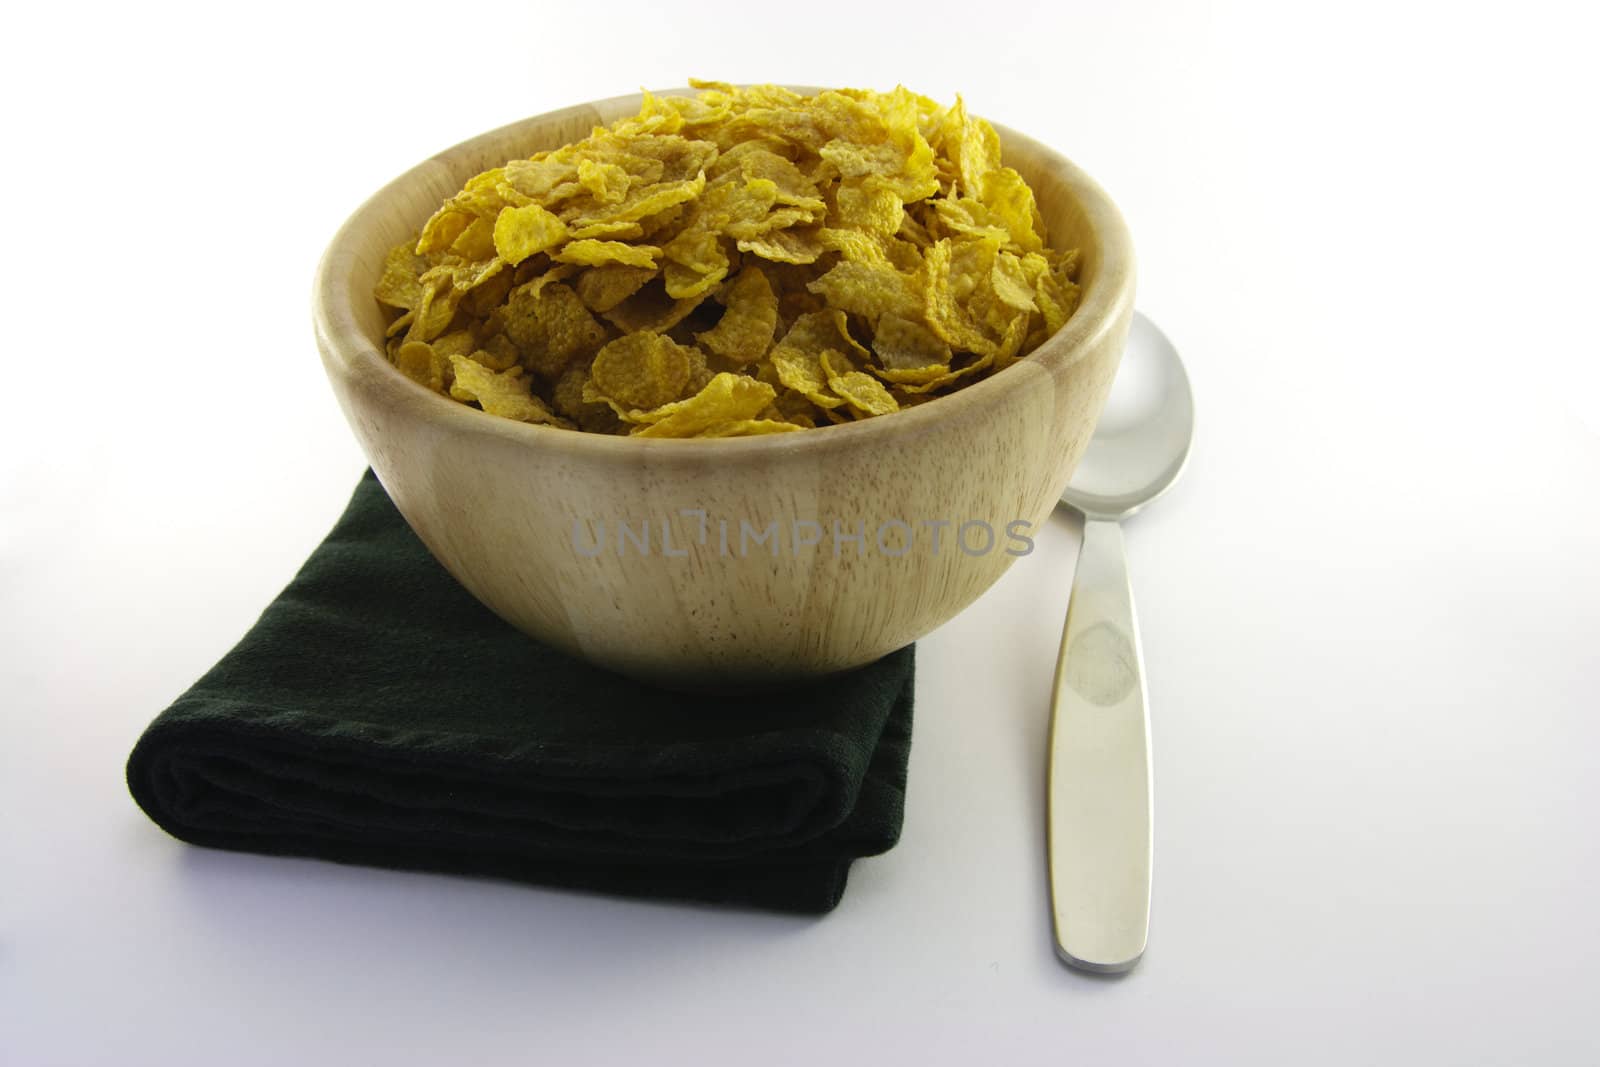 Golden crisp cornflakes in a round wooden bowl with a black napkin and a spoon on a white background